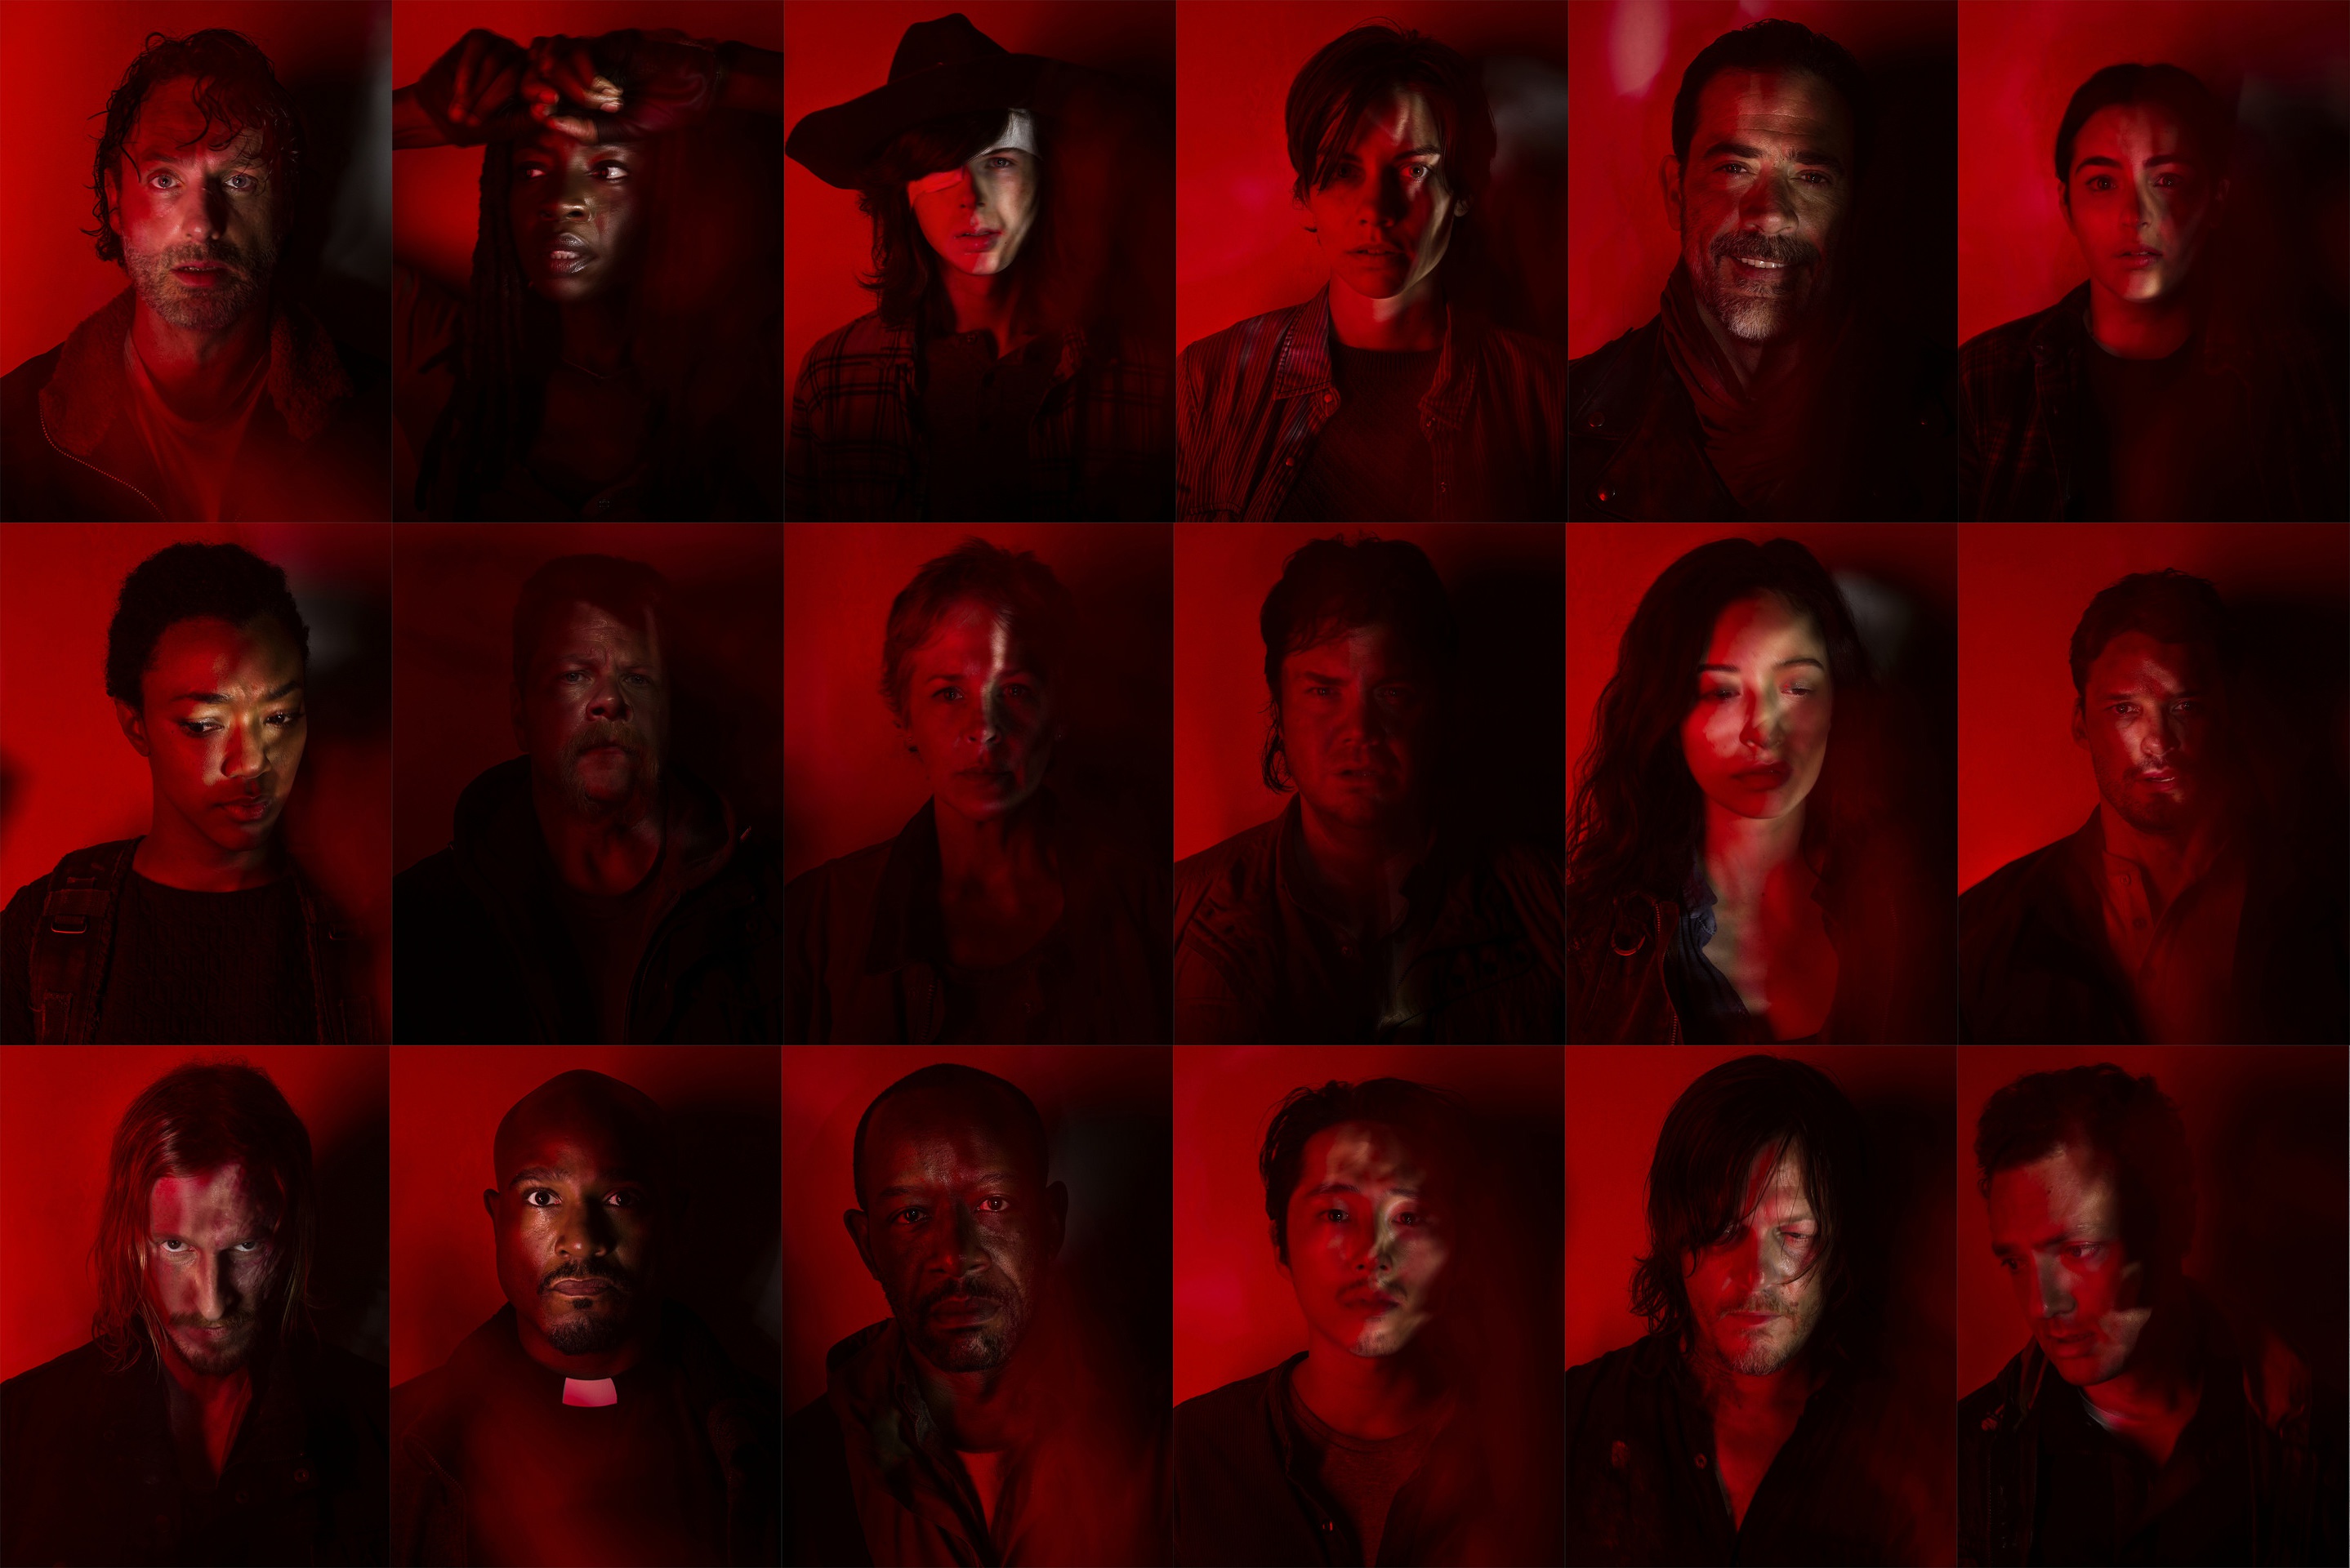 The Walking Dead Rick Grimes Andrew Lincoln Michonne The Walking Dead Danai Gurira Carl Grimes Chand 2877x1920